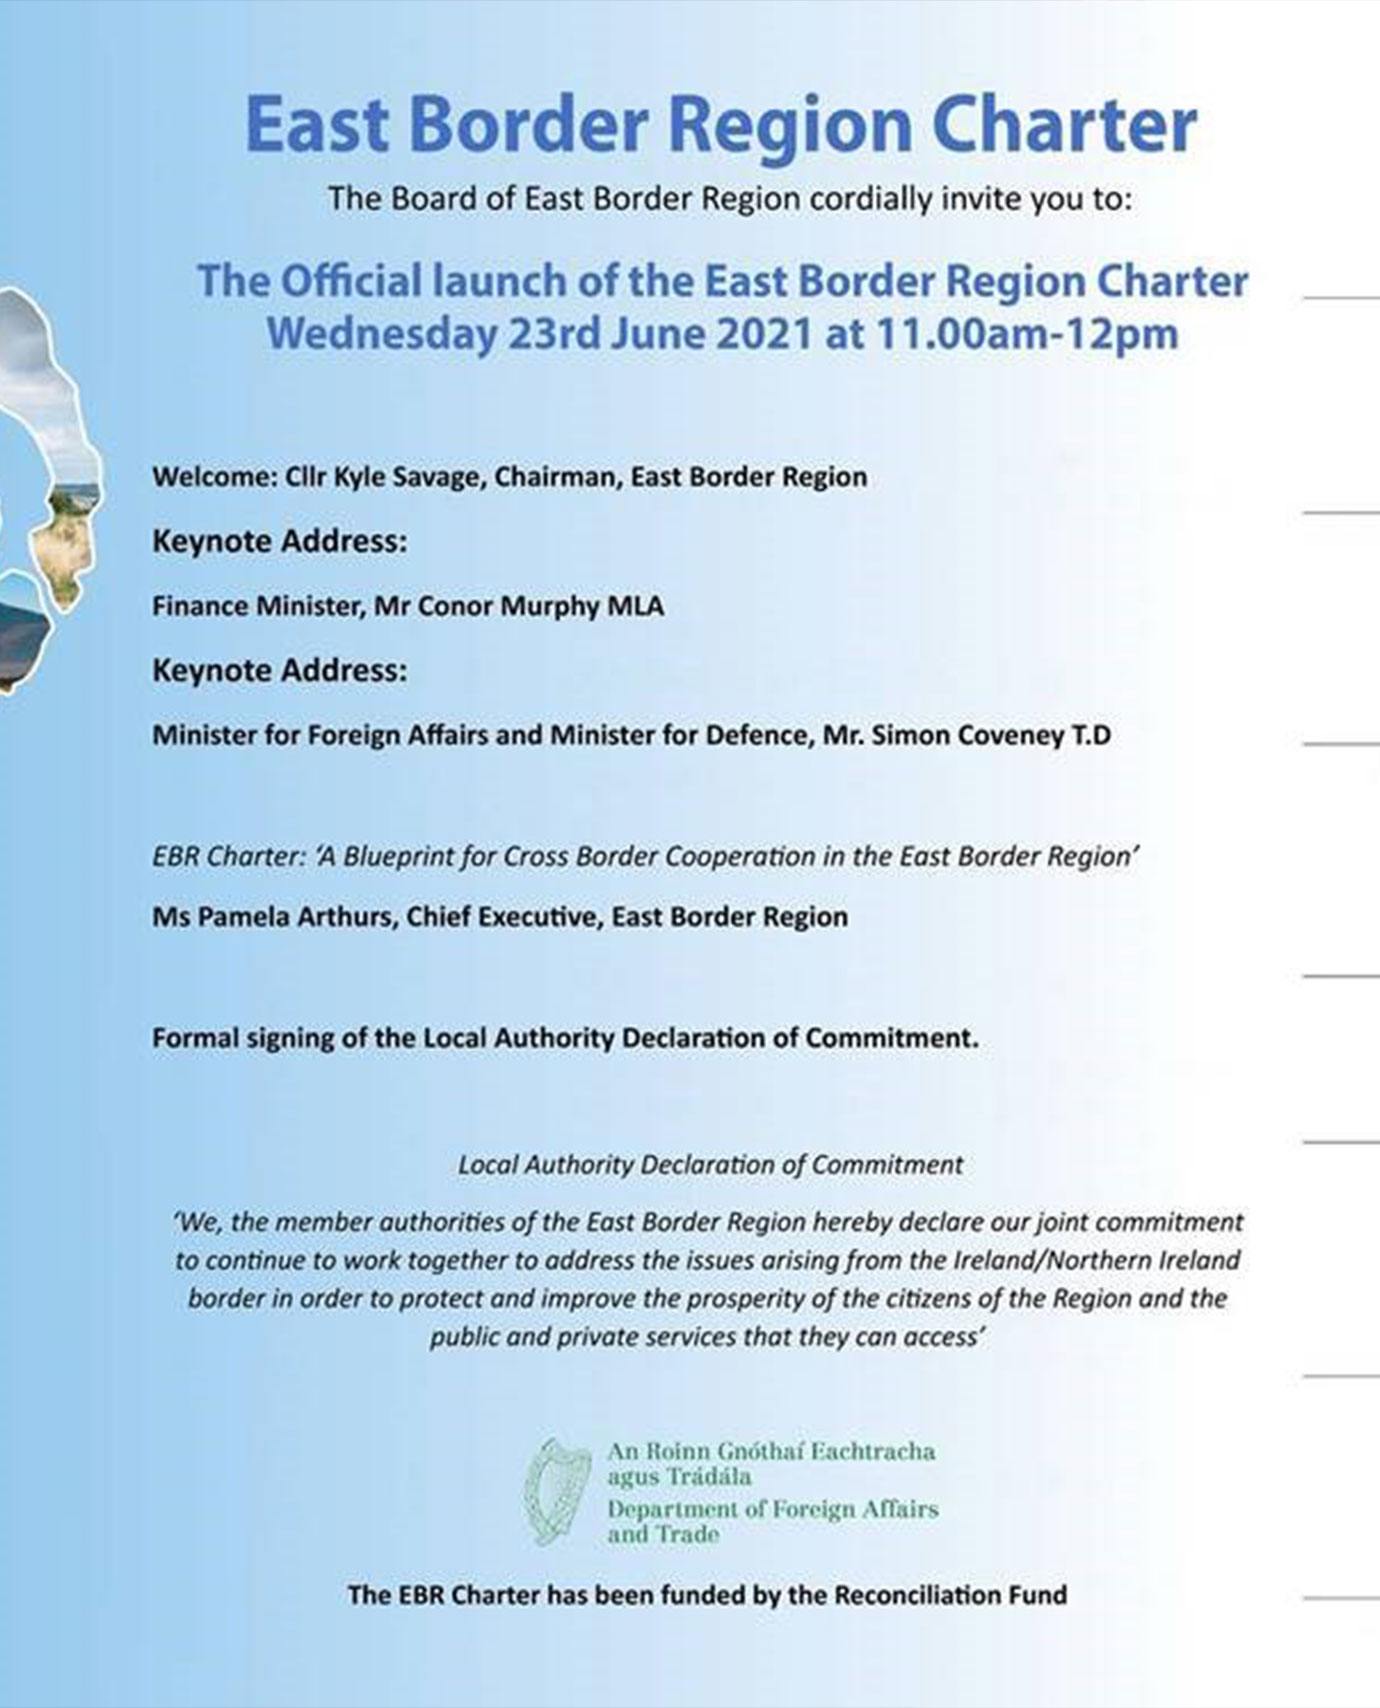 EBR launch Charter ‘A Blueprint for Cross Border Cooperation in the East Border Region’ 